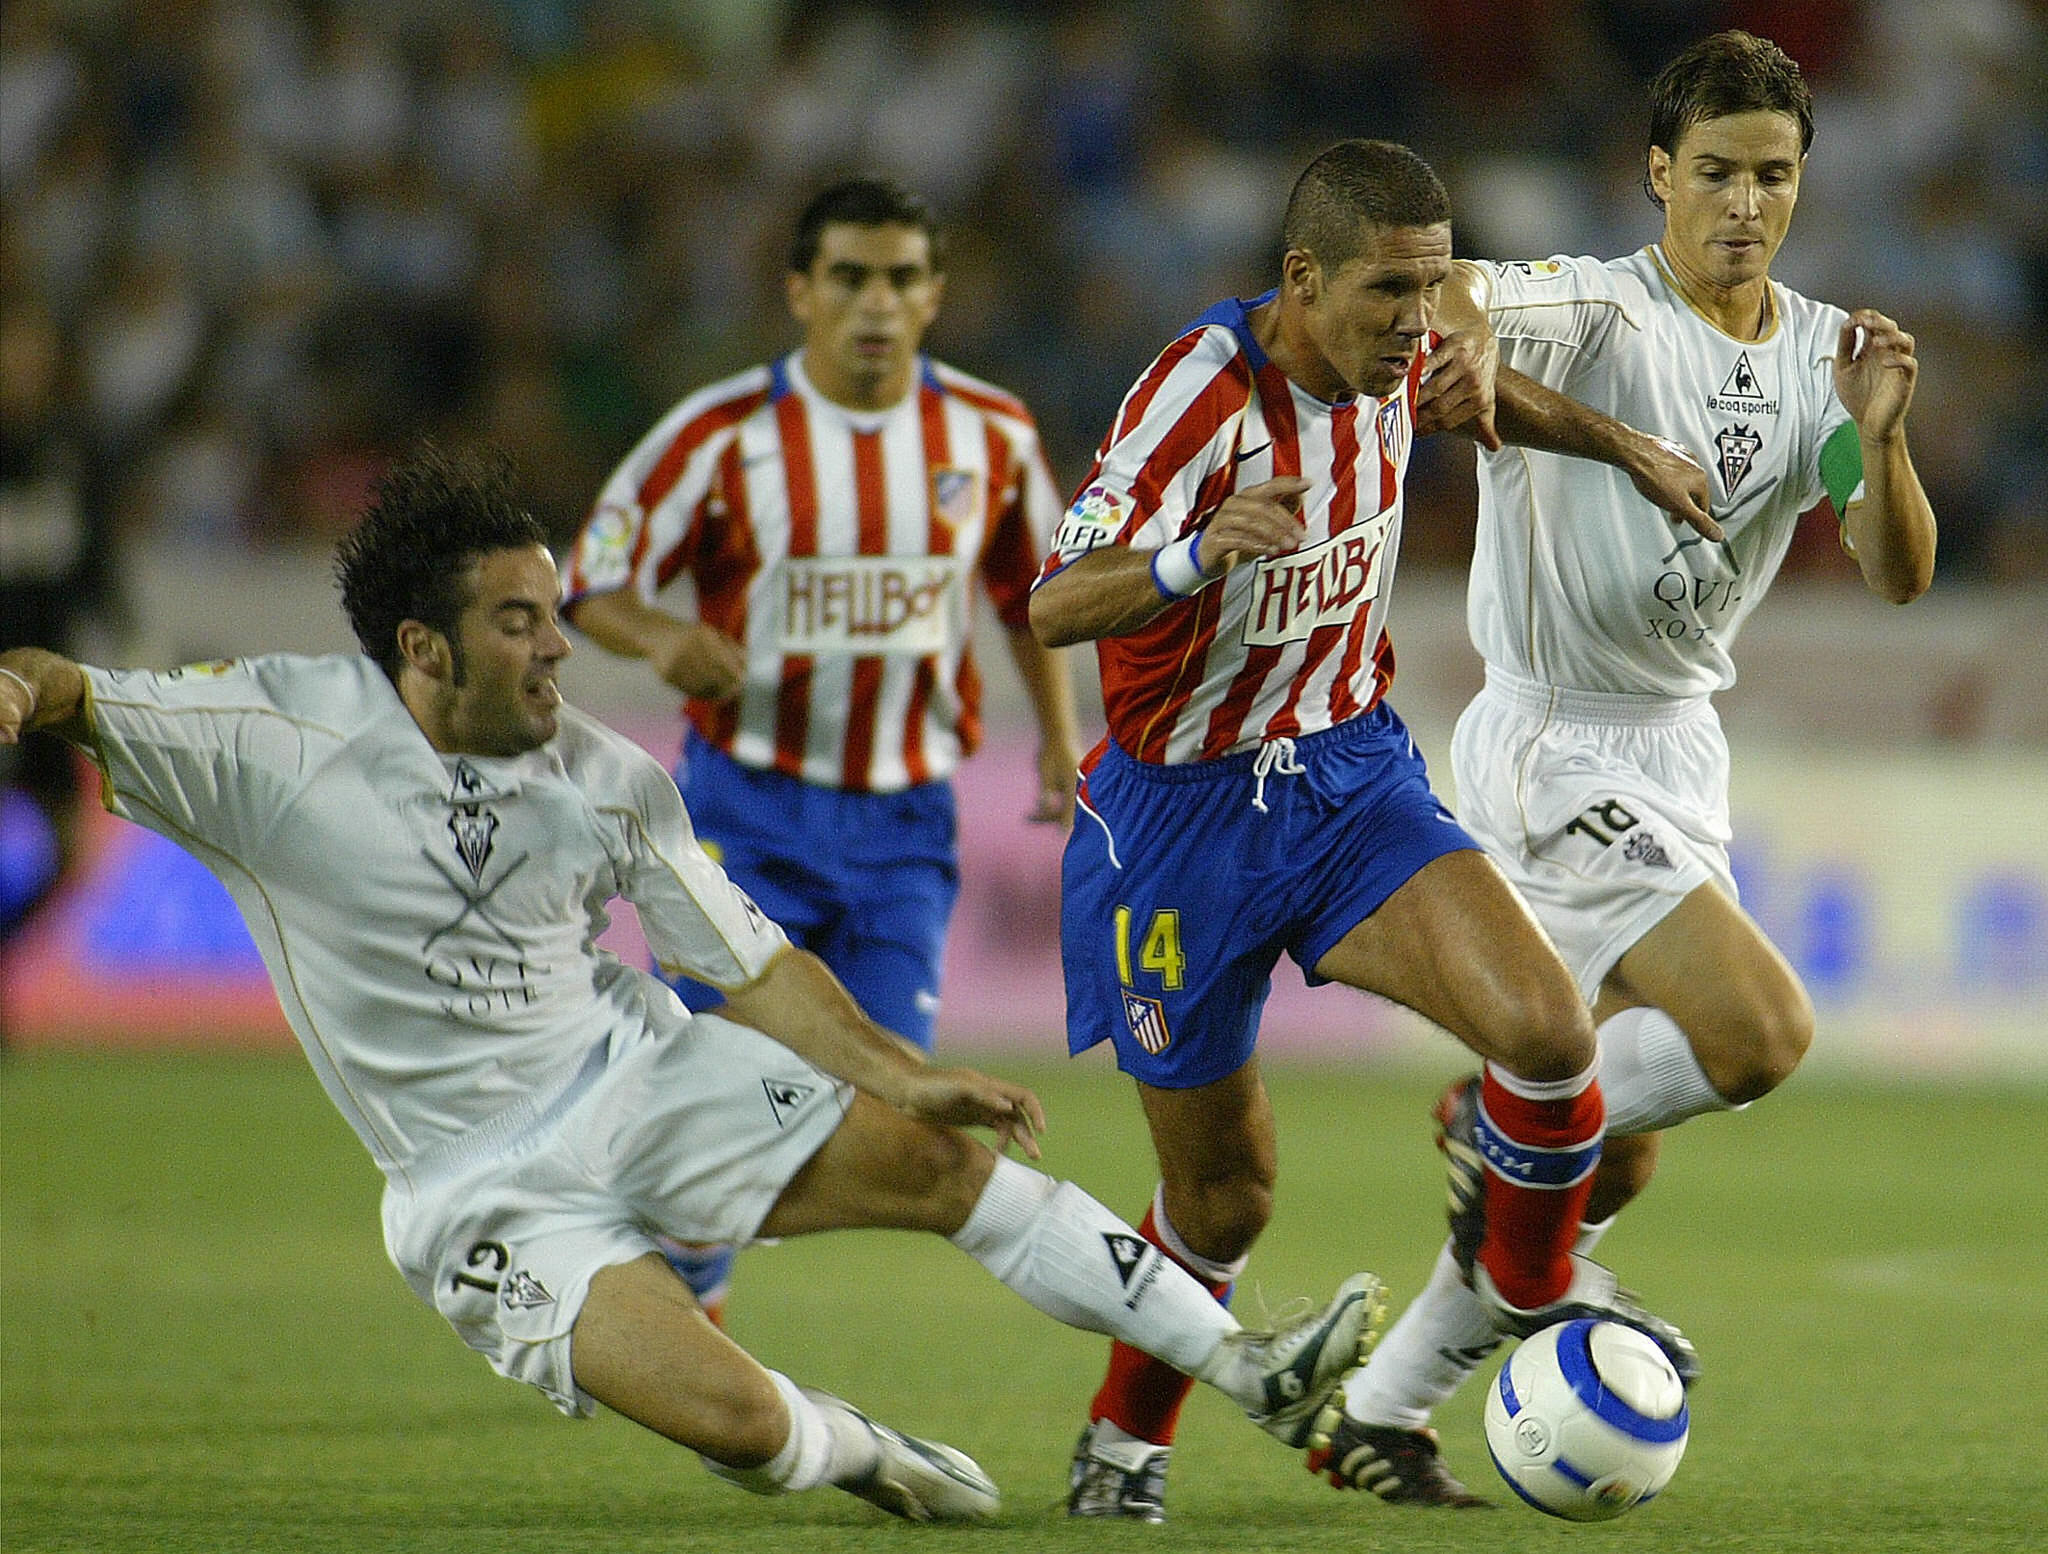 Diego Simeone in action for Atletico Madrid against Albacete in 2004.